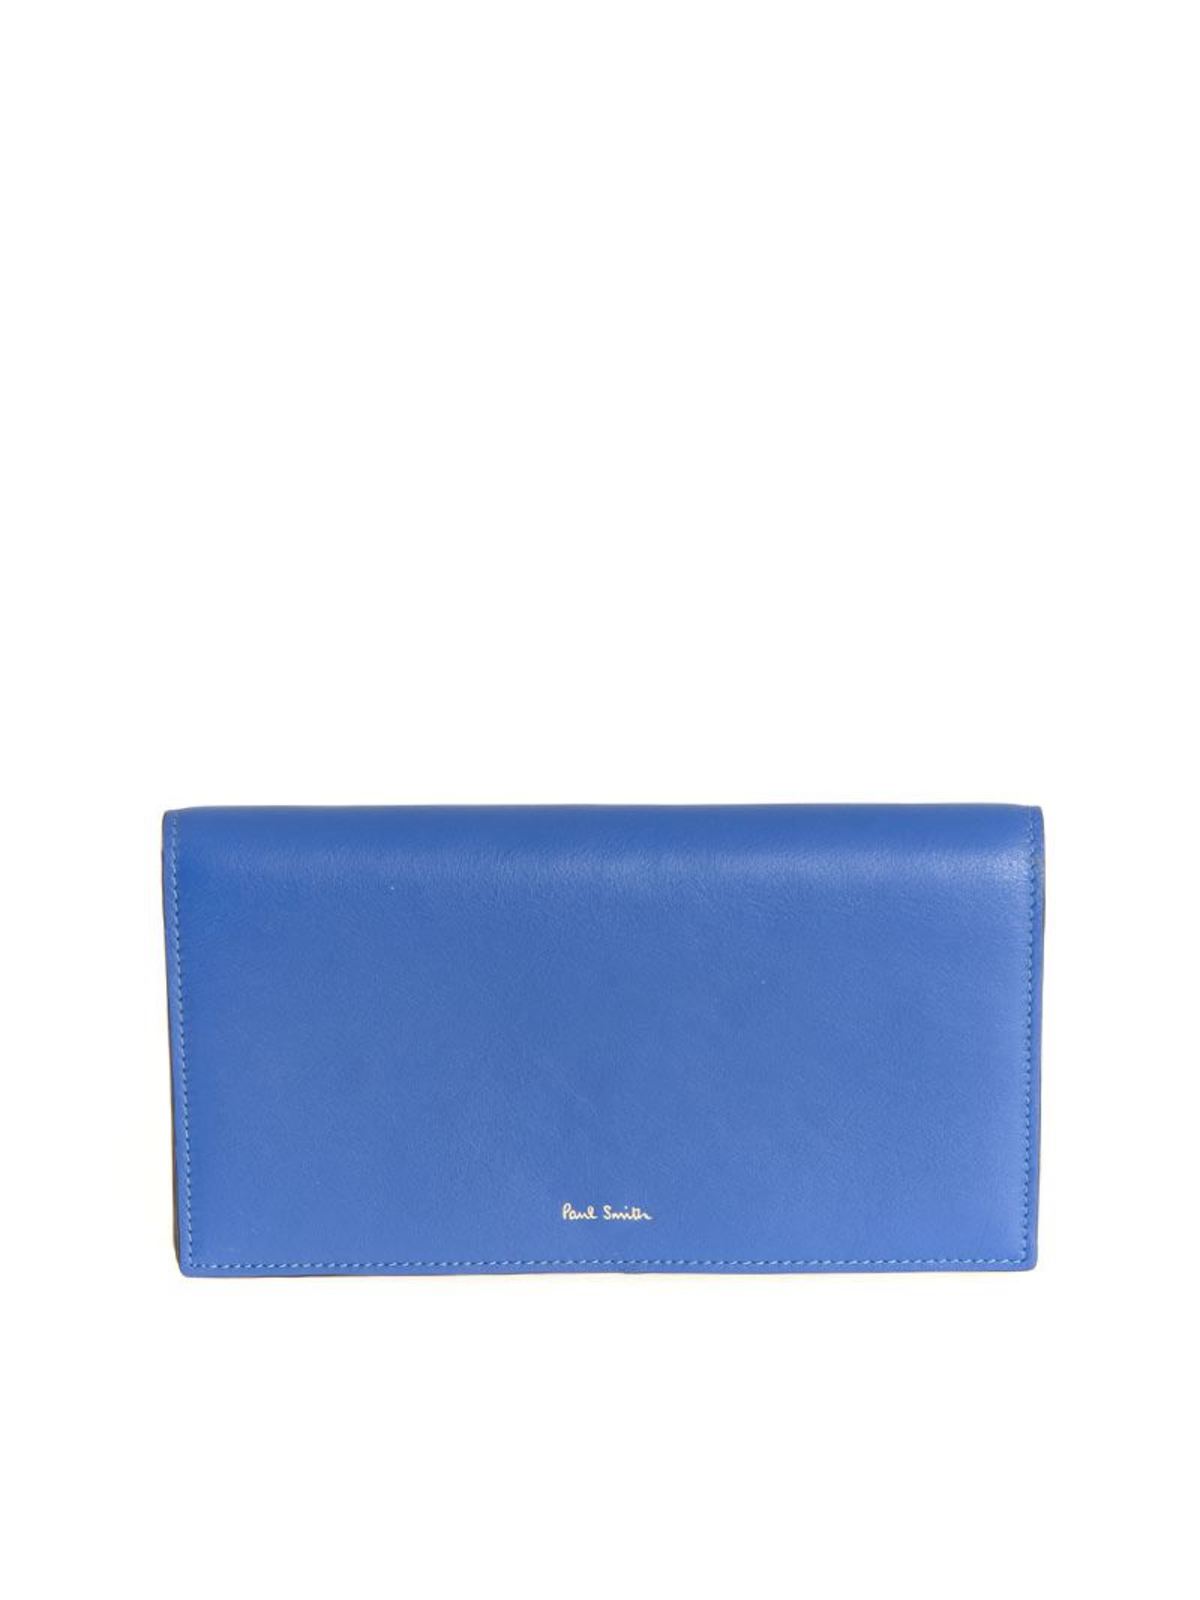 Paul Smith Leather Wallet In Azul